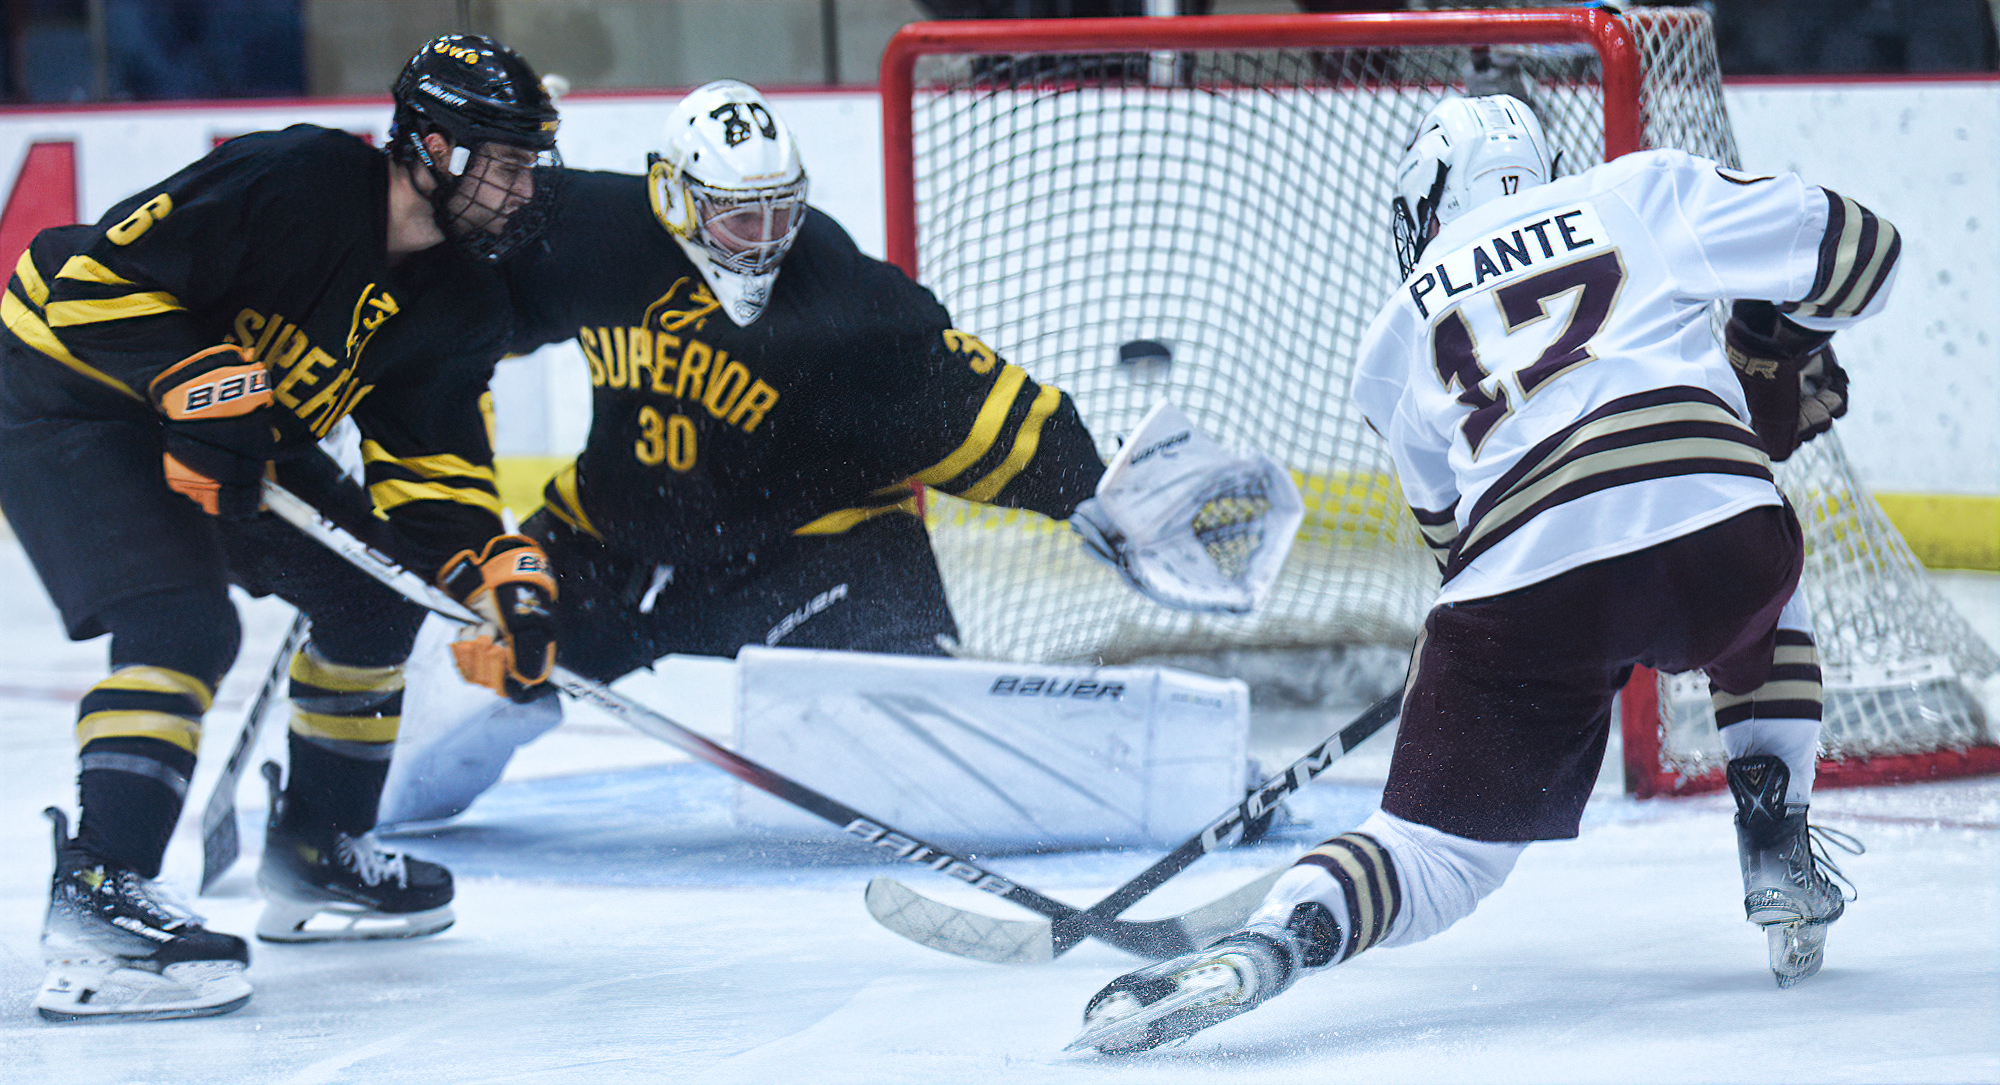 Mason Plante has his second-period stopped in the Cobbers' 4-0 win over UW-Superior. He went on to score CC's fourth goal of the game.